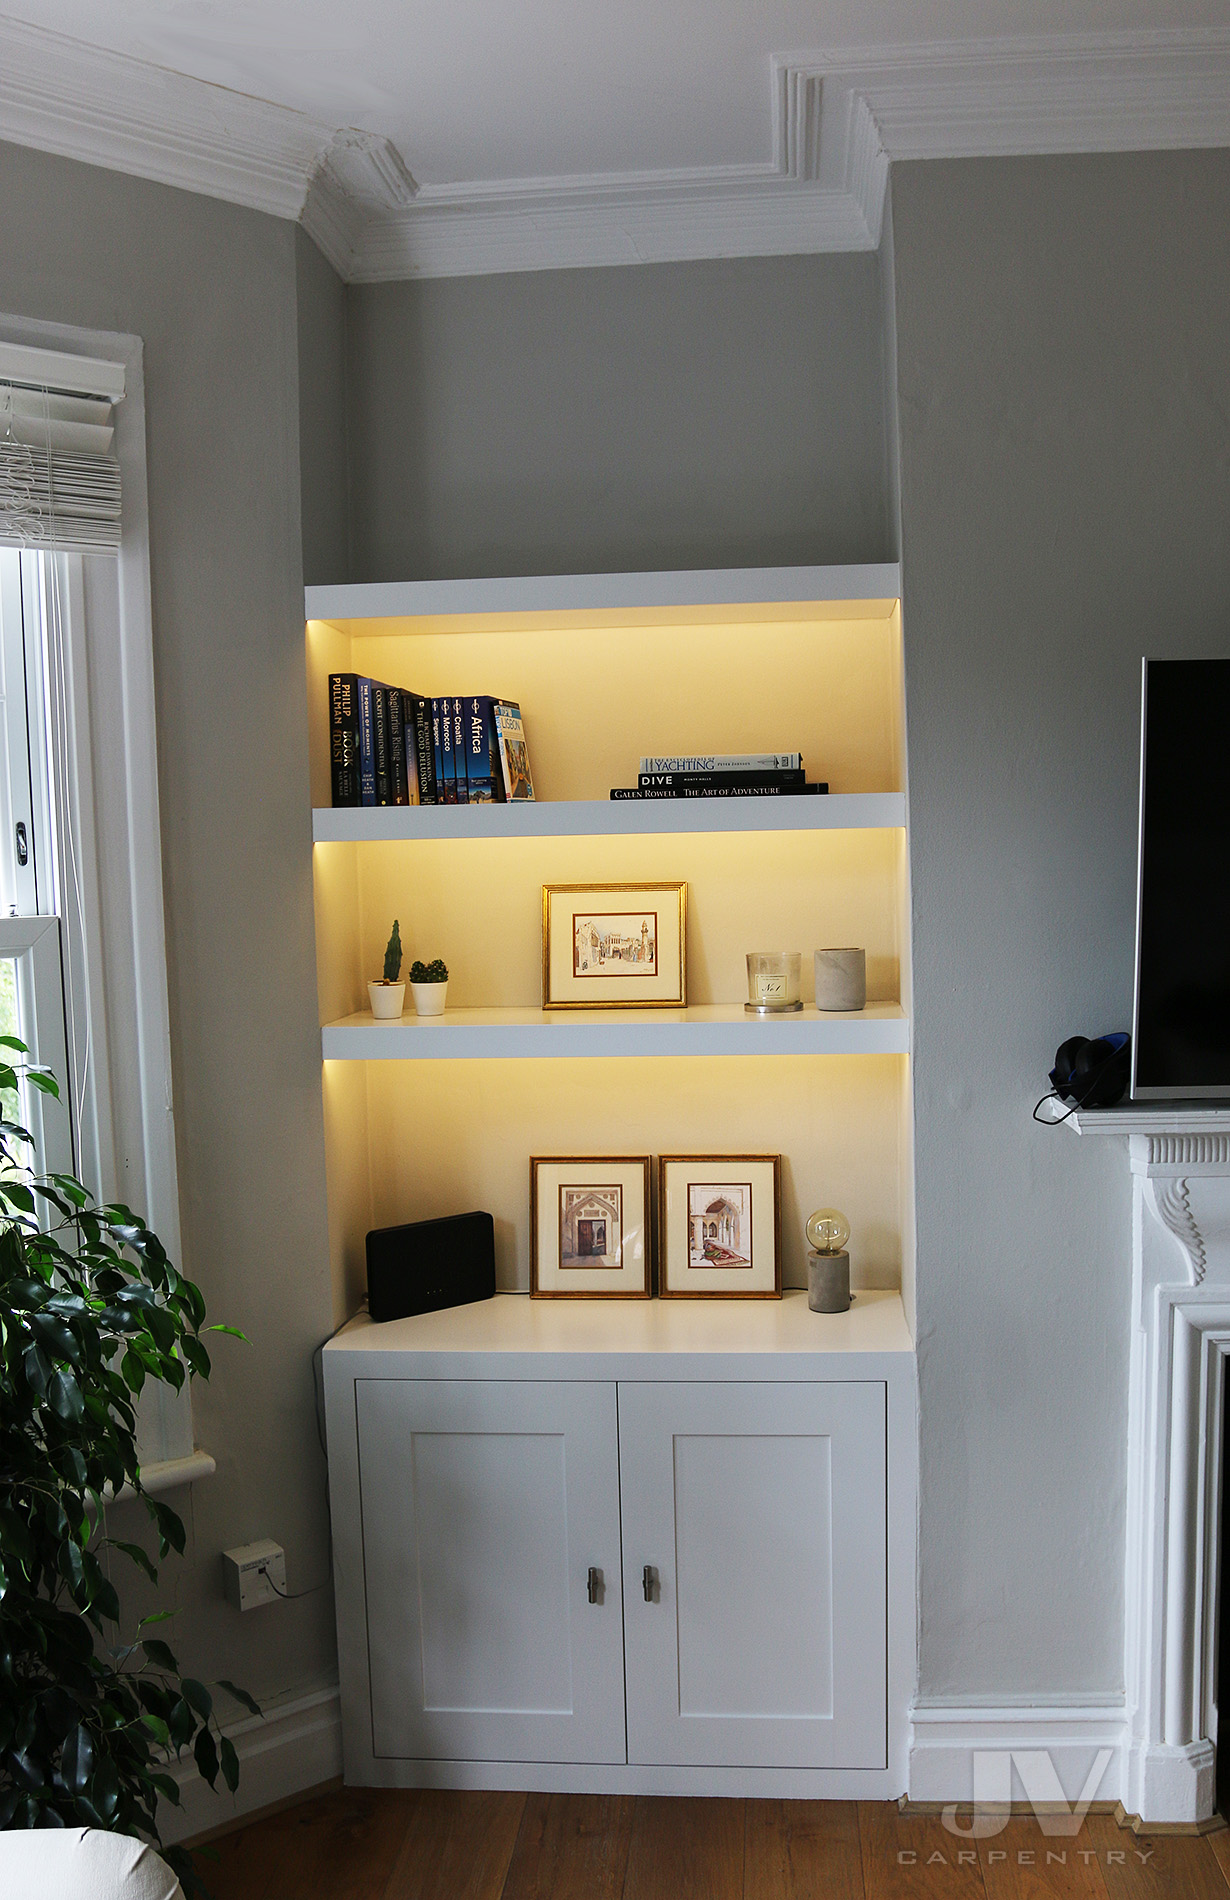 alcove shelving with lights and cabinet at the bottom LHS